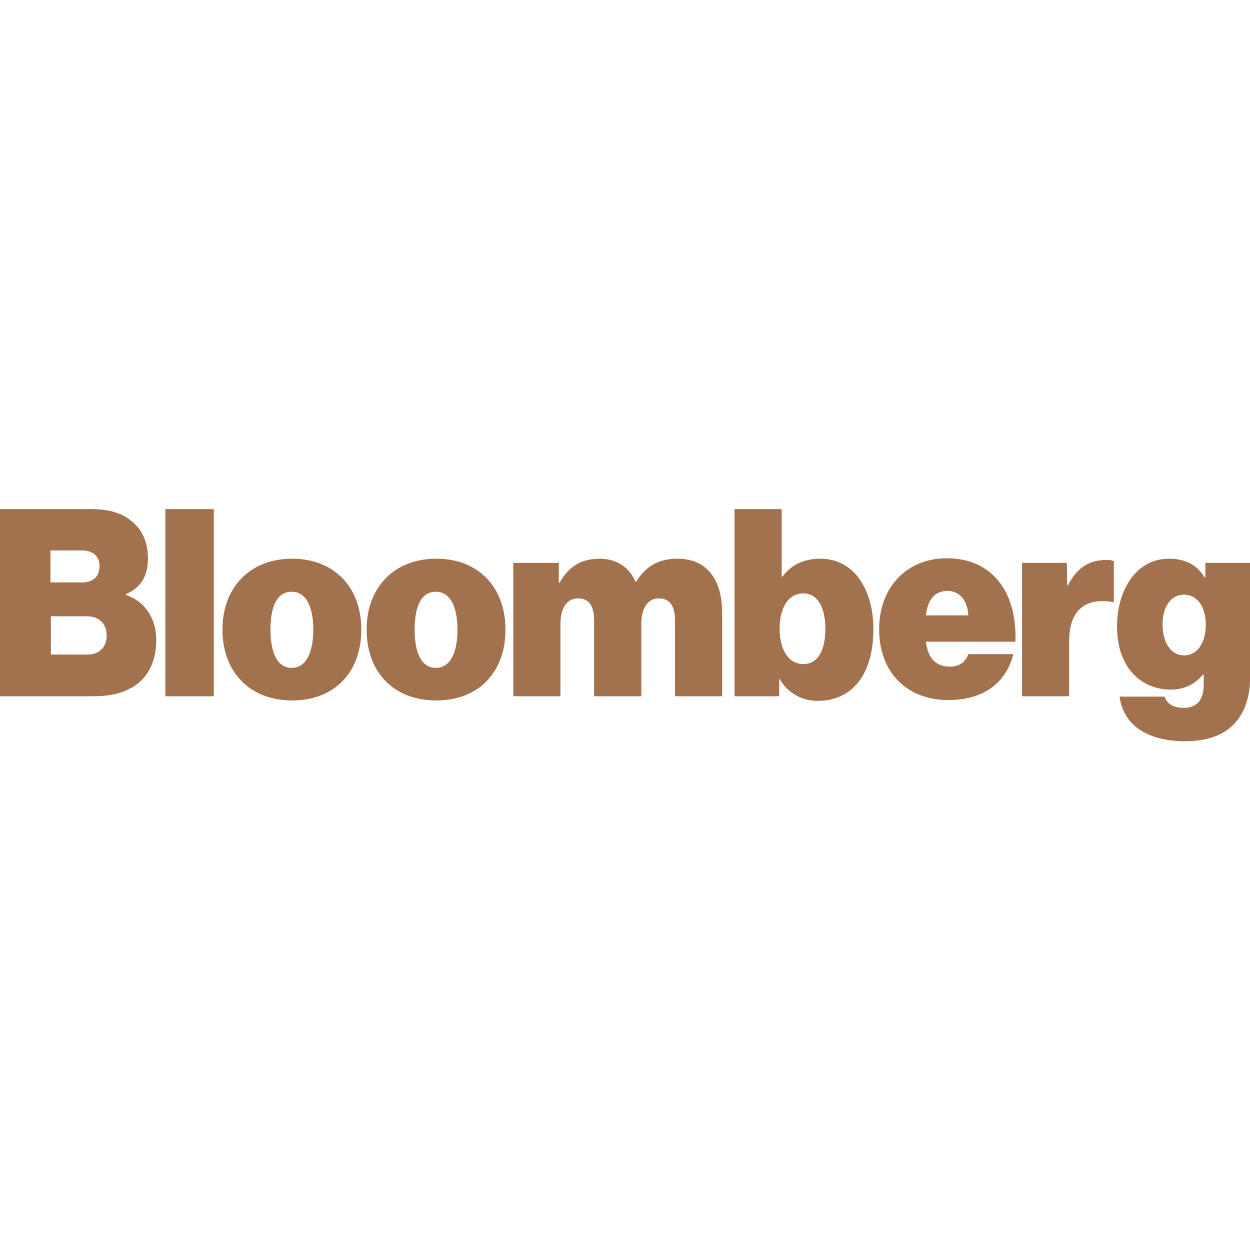 bloomberg.png